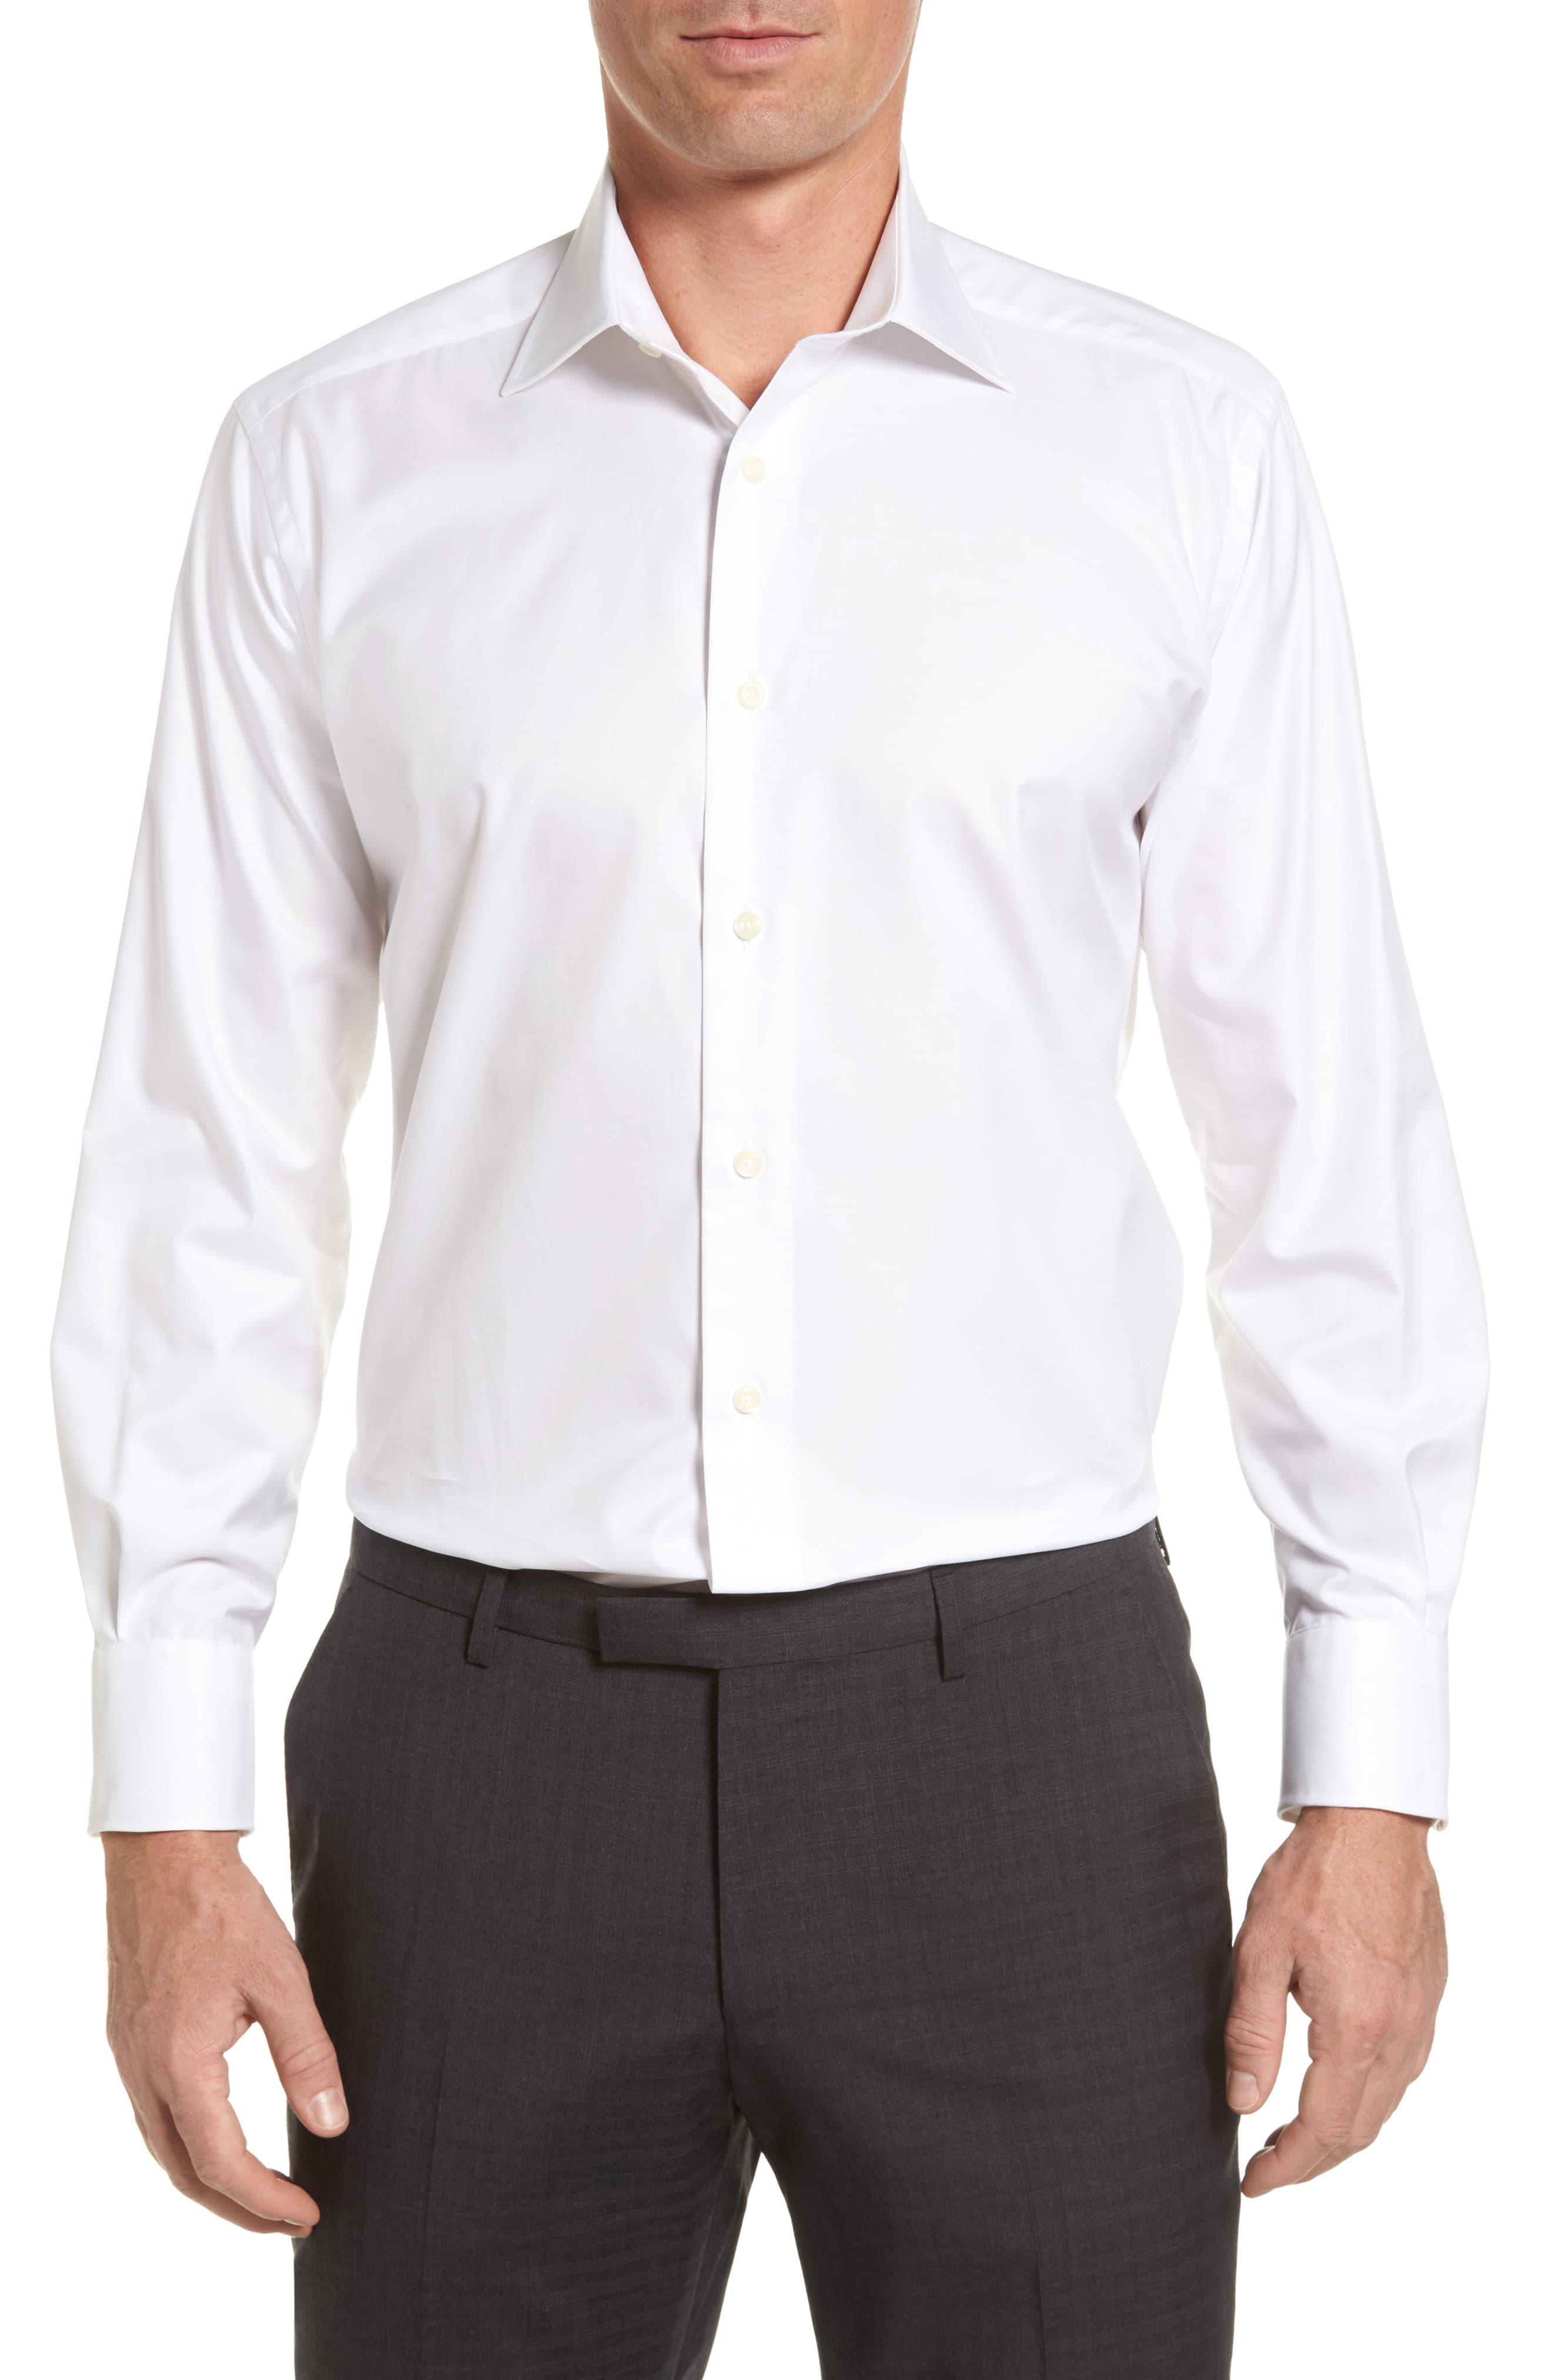 David Donahue Regular Fit Solid Dress Shirt in White for Men - Save 7% ...